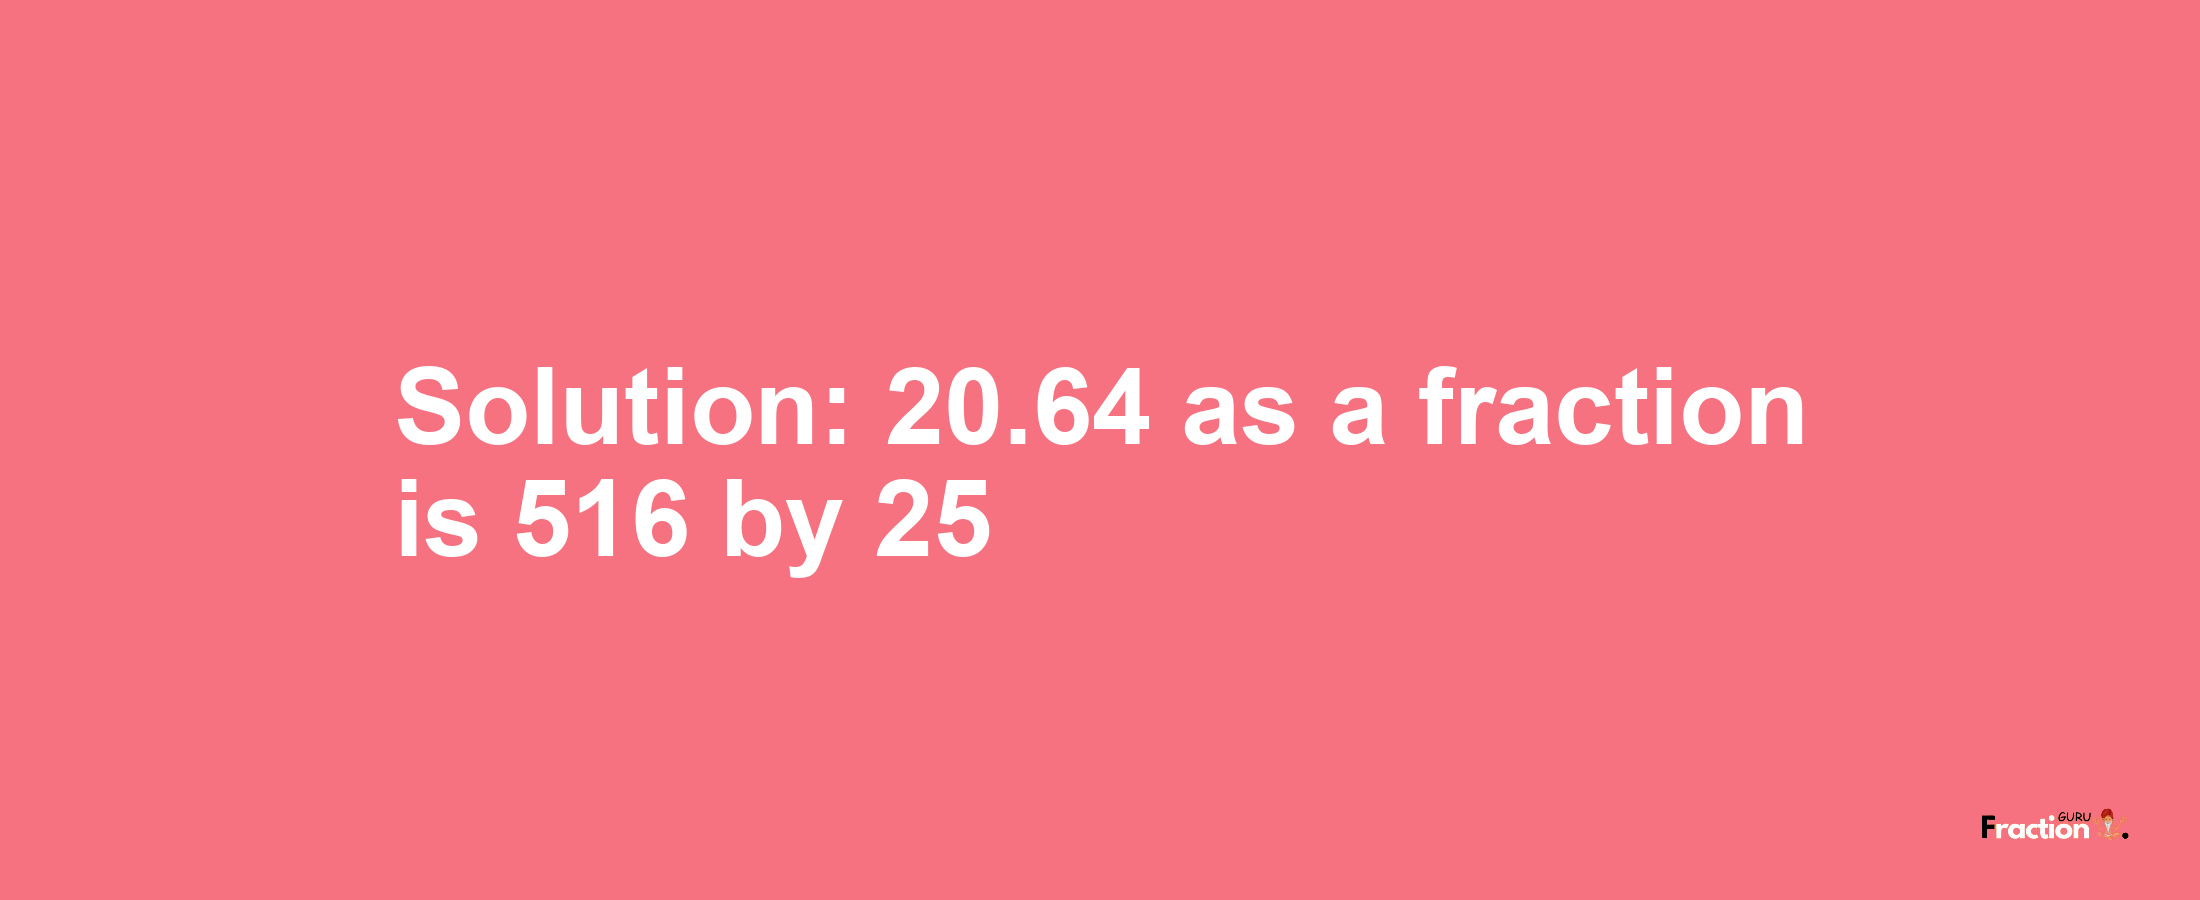 Solution:20.64 as a fraction is 516/25